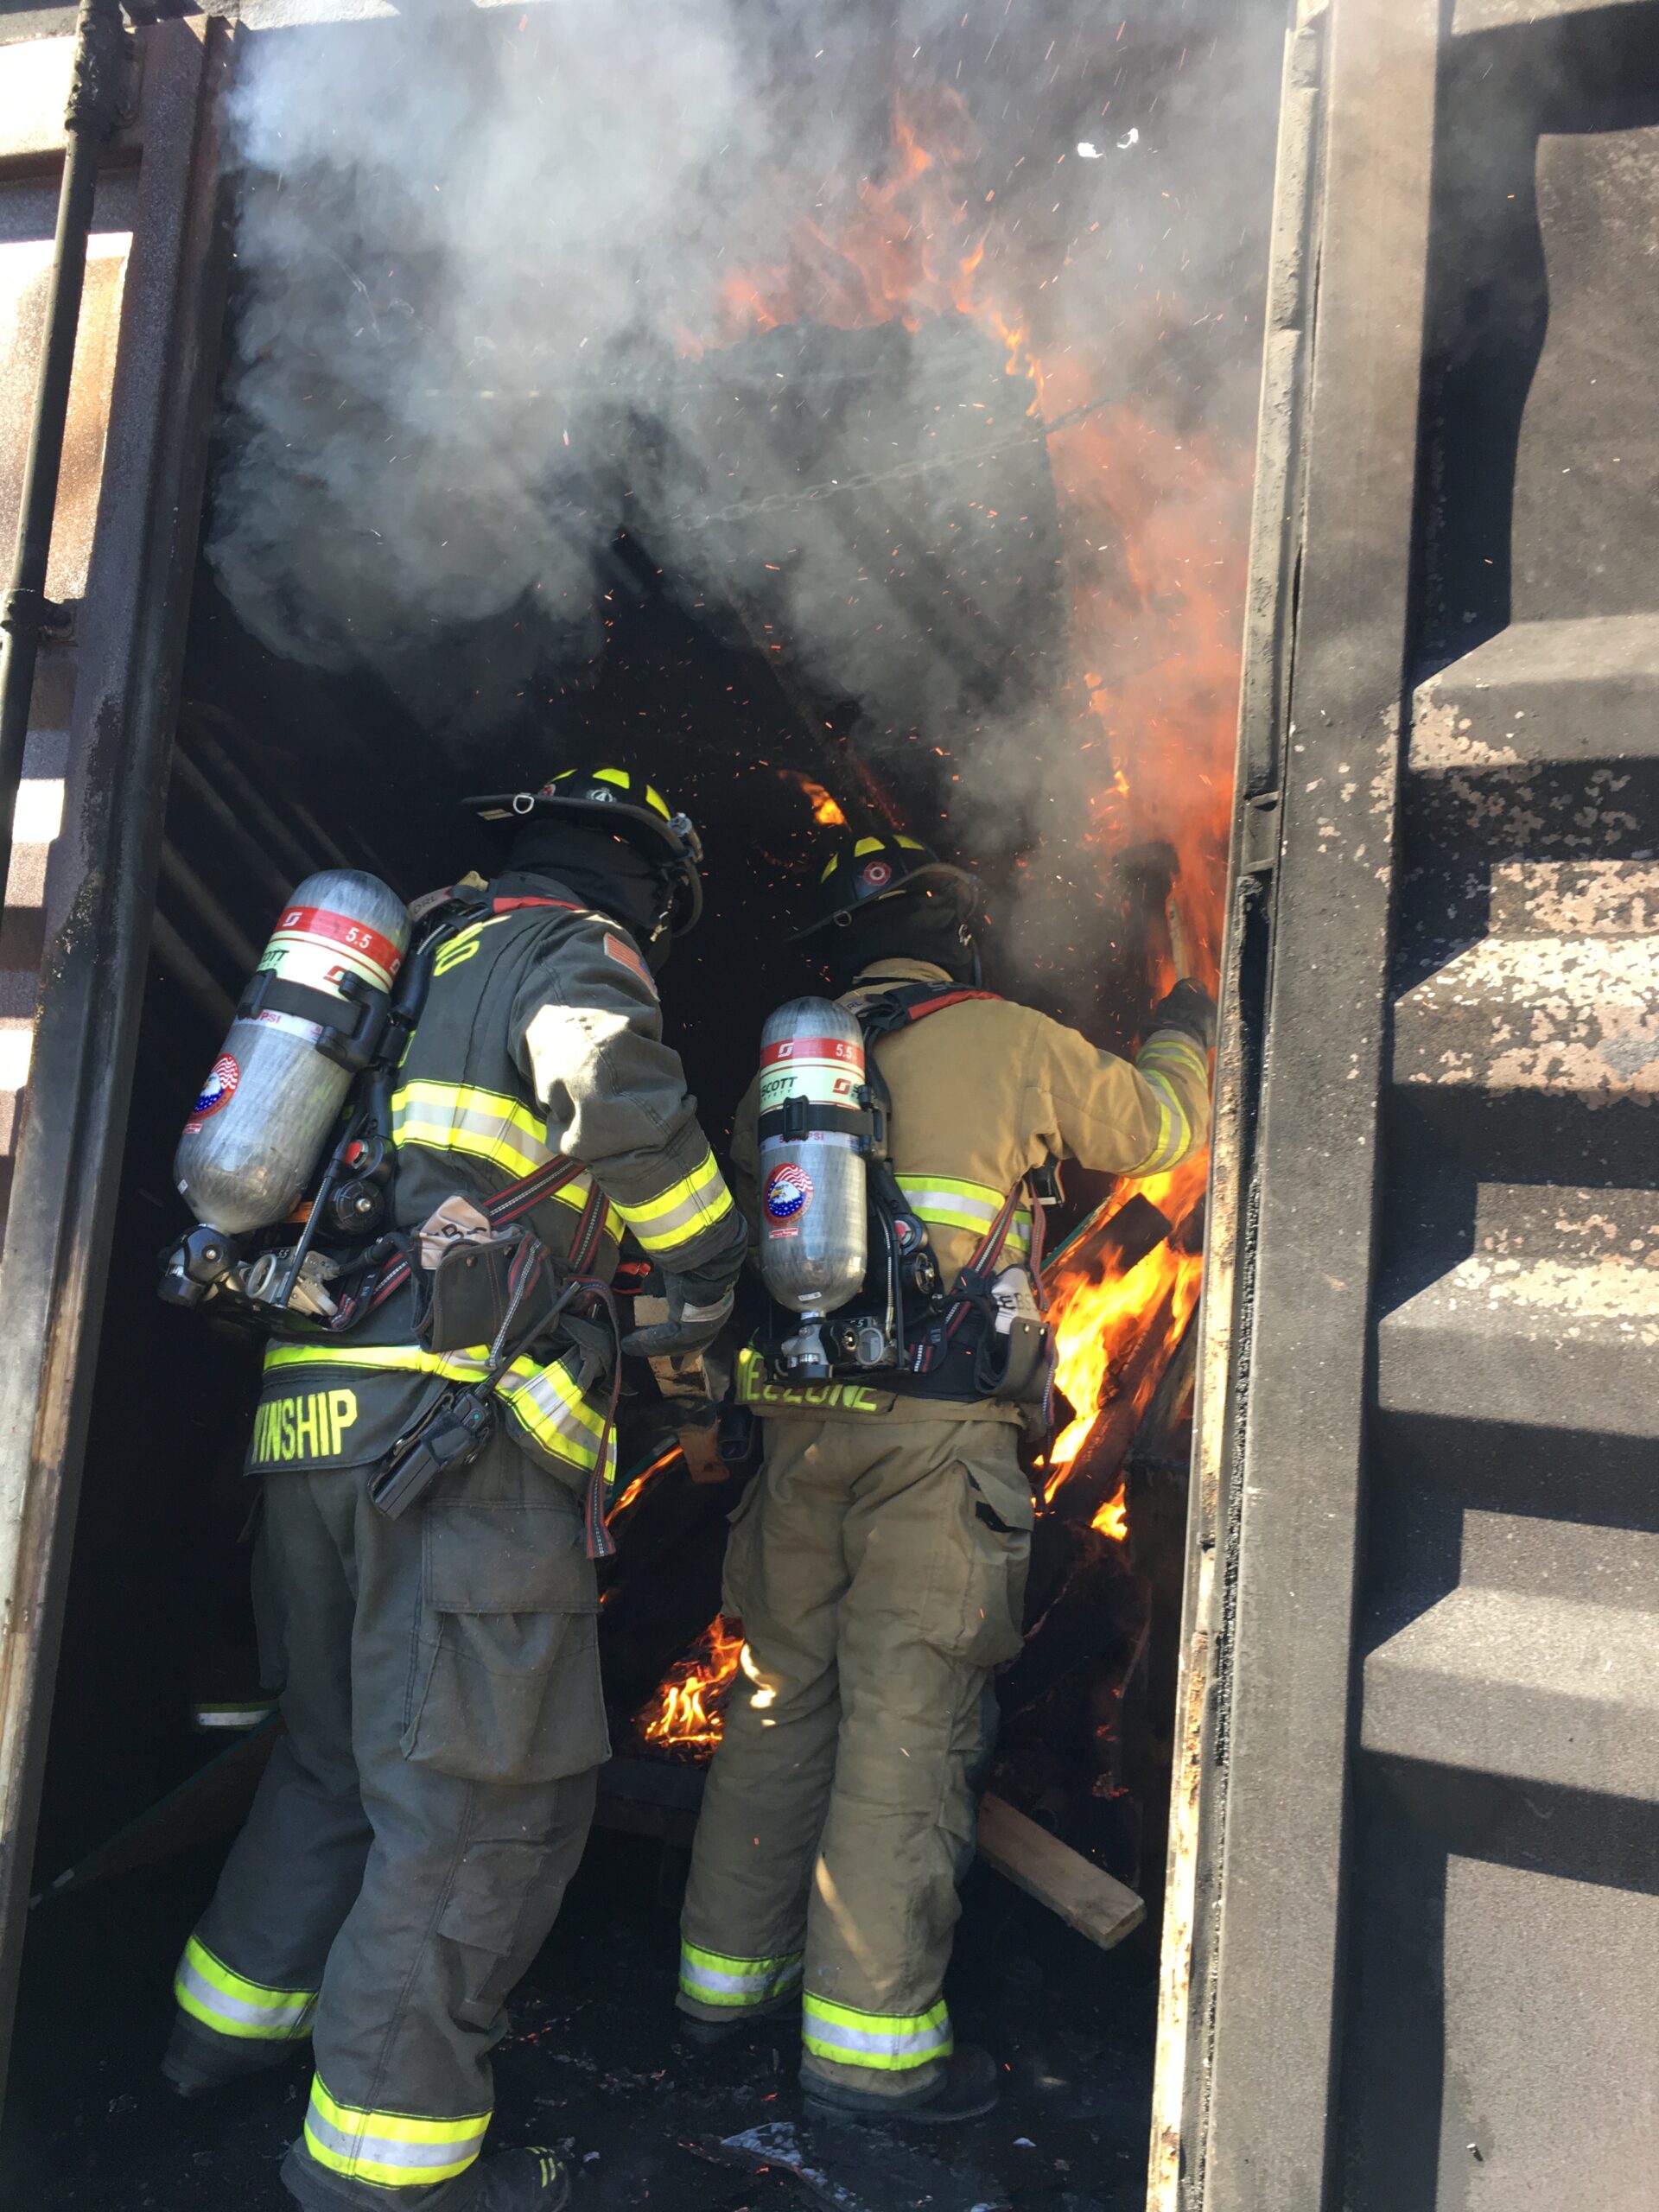 firefighters in bunker gear stand in the door of a container with flames in the background